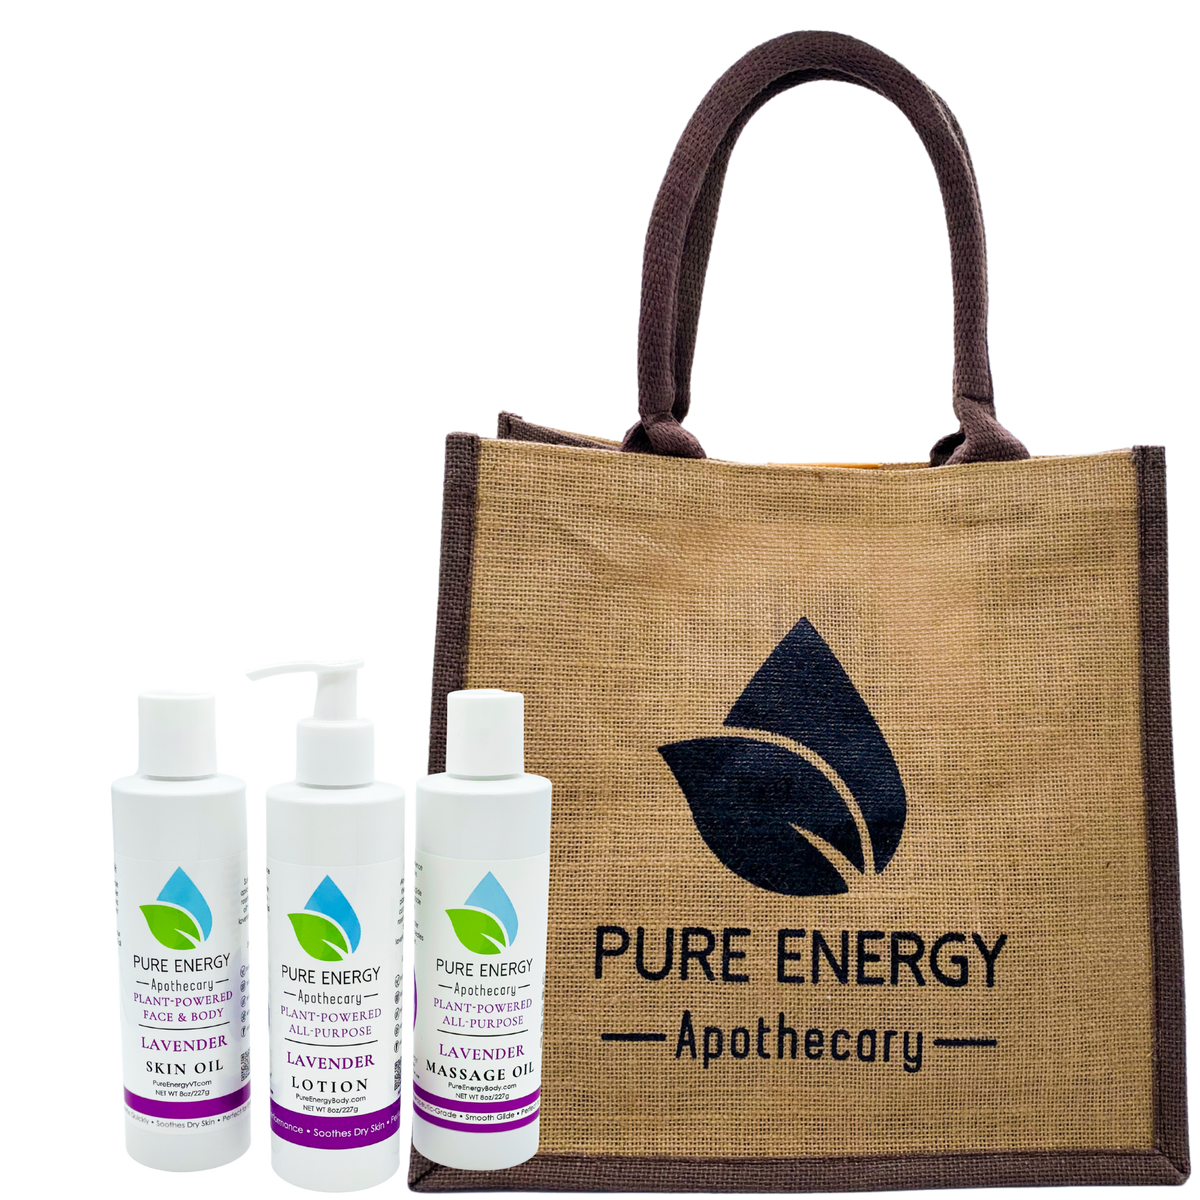 Moisture Madness Gift Set (Lavender) by Pure Energy Apothecary